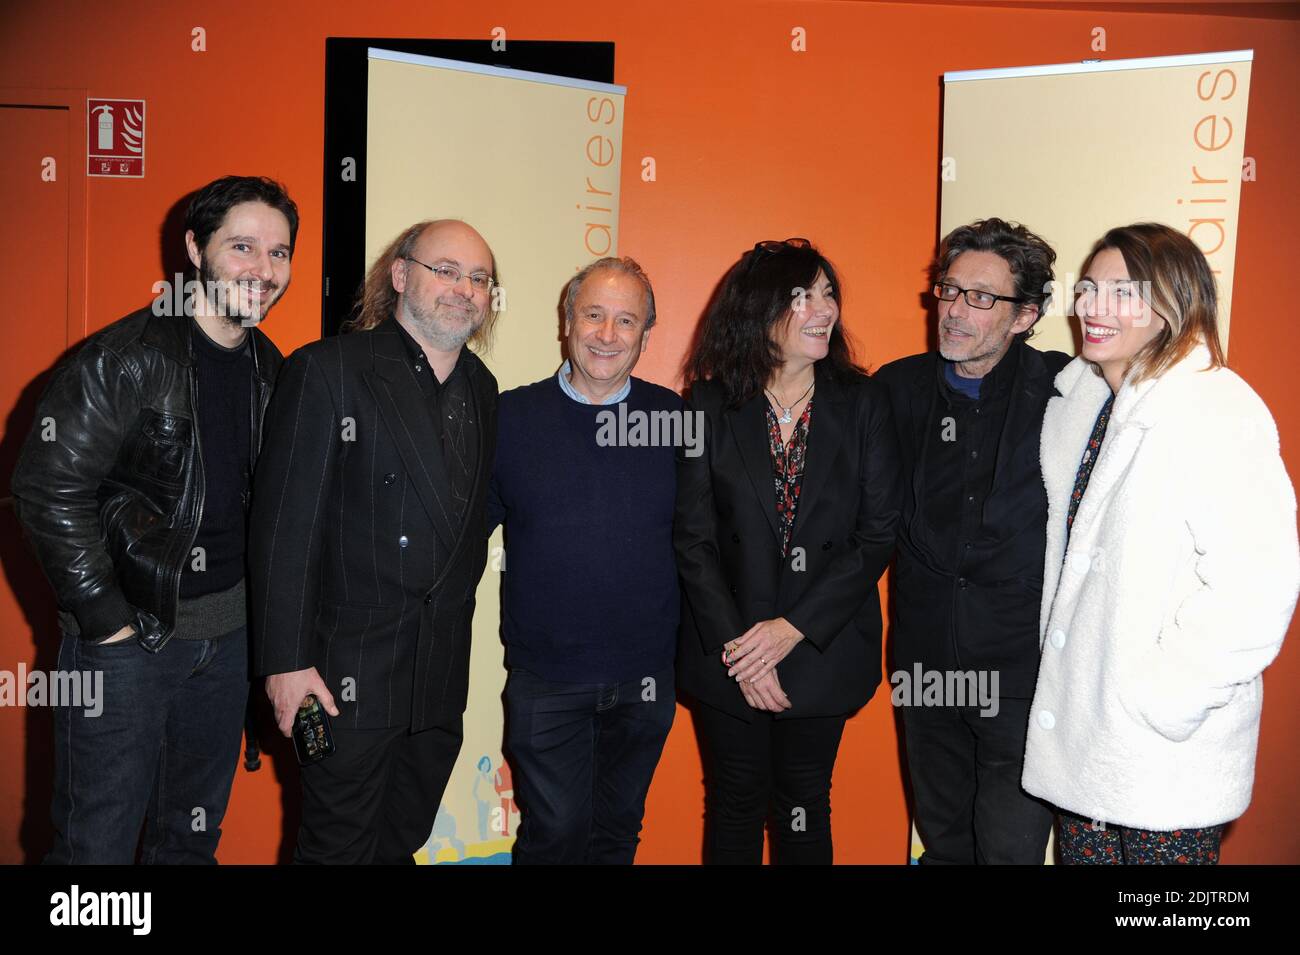 Alexandre Philip, Philippe Braunstein, Patrick Braoude, Sophie Deloche,  Nils Tavernier and Anais Fabre attending the launching party of France 2  webseries 'Vestiaires' season 6 and 'Vestiaires liberes' season 2, at  Gaumont Opera